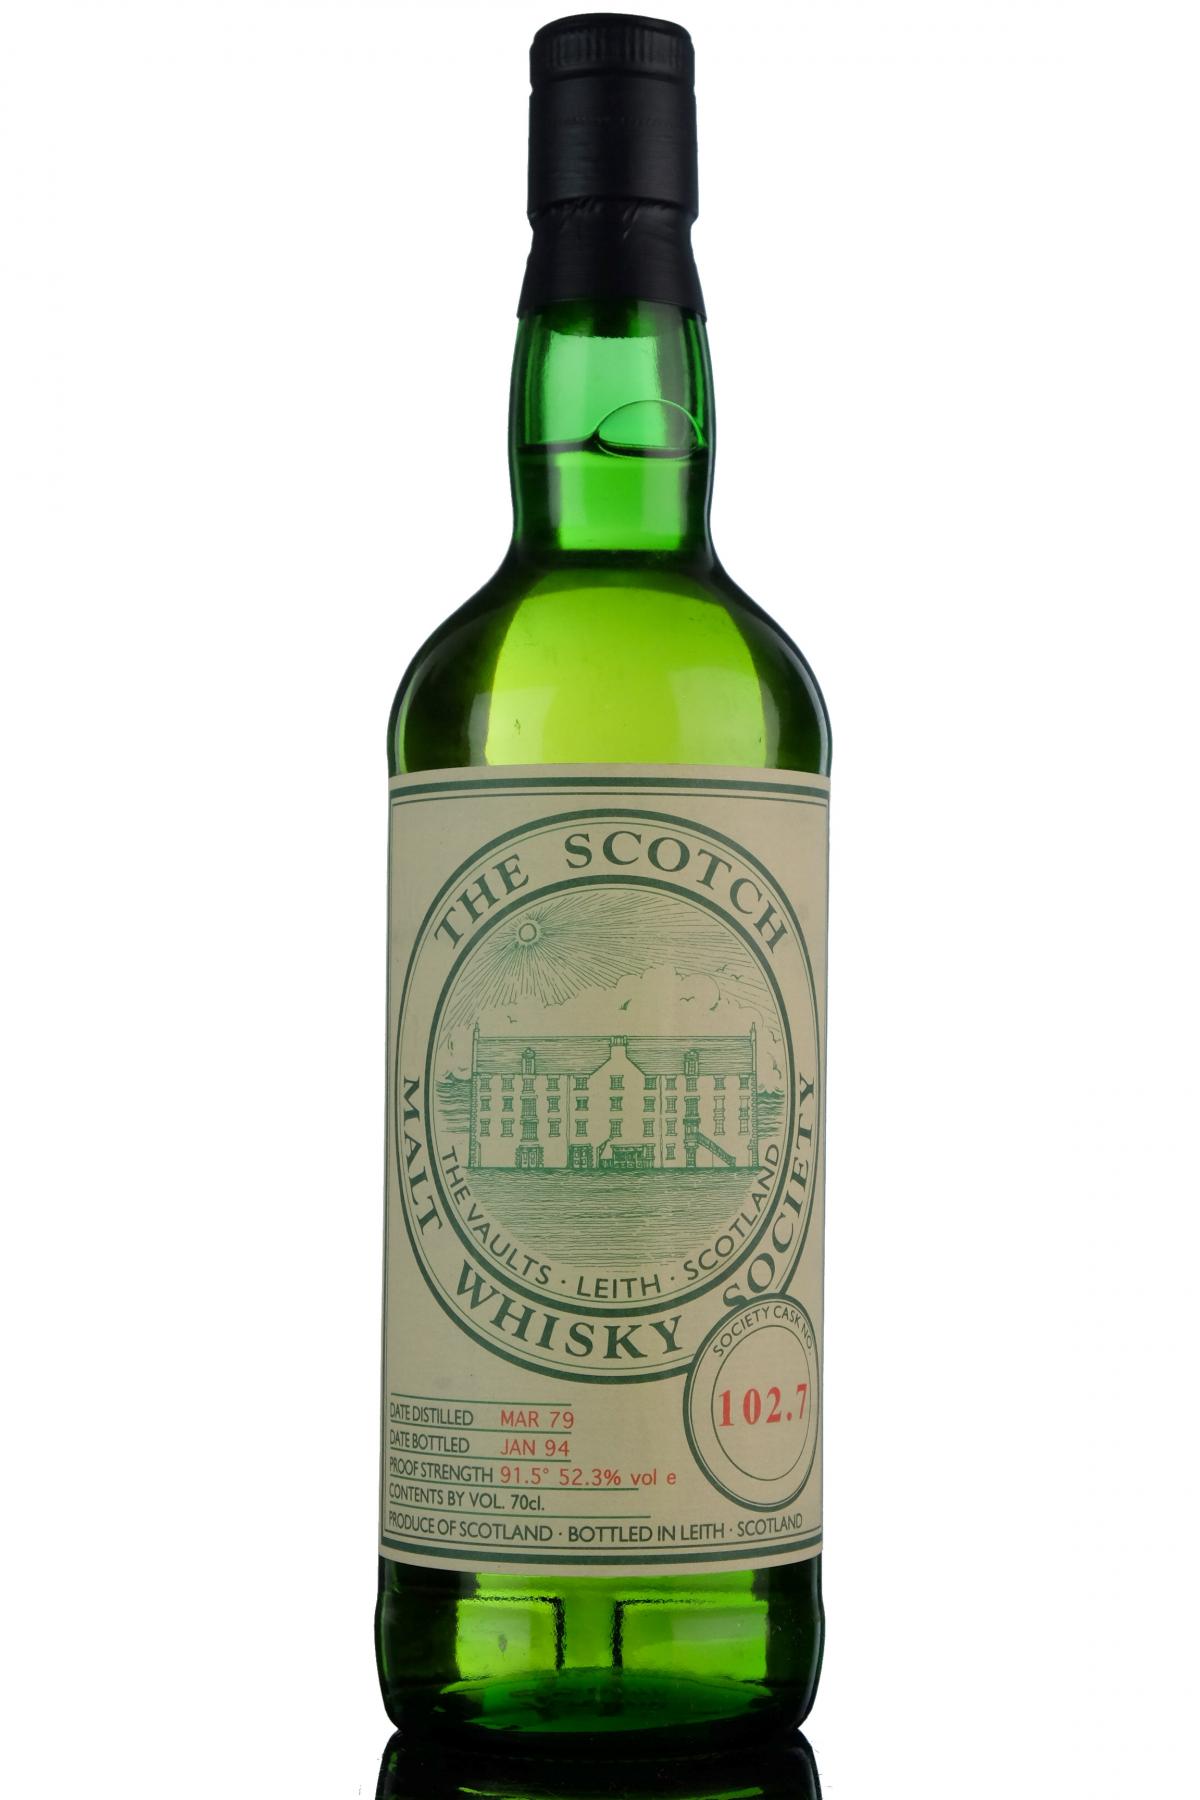 Dalwhinnie 1979-1994 - SMWS 102.7